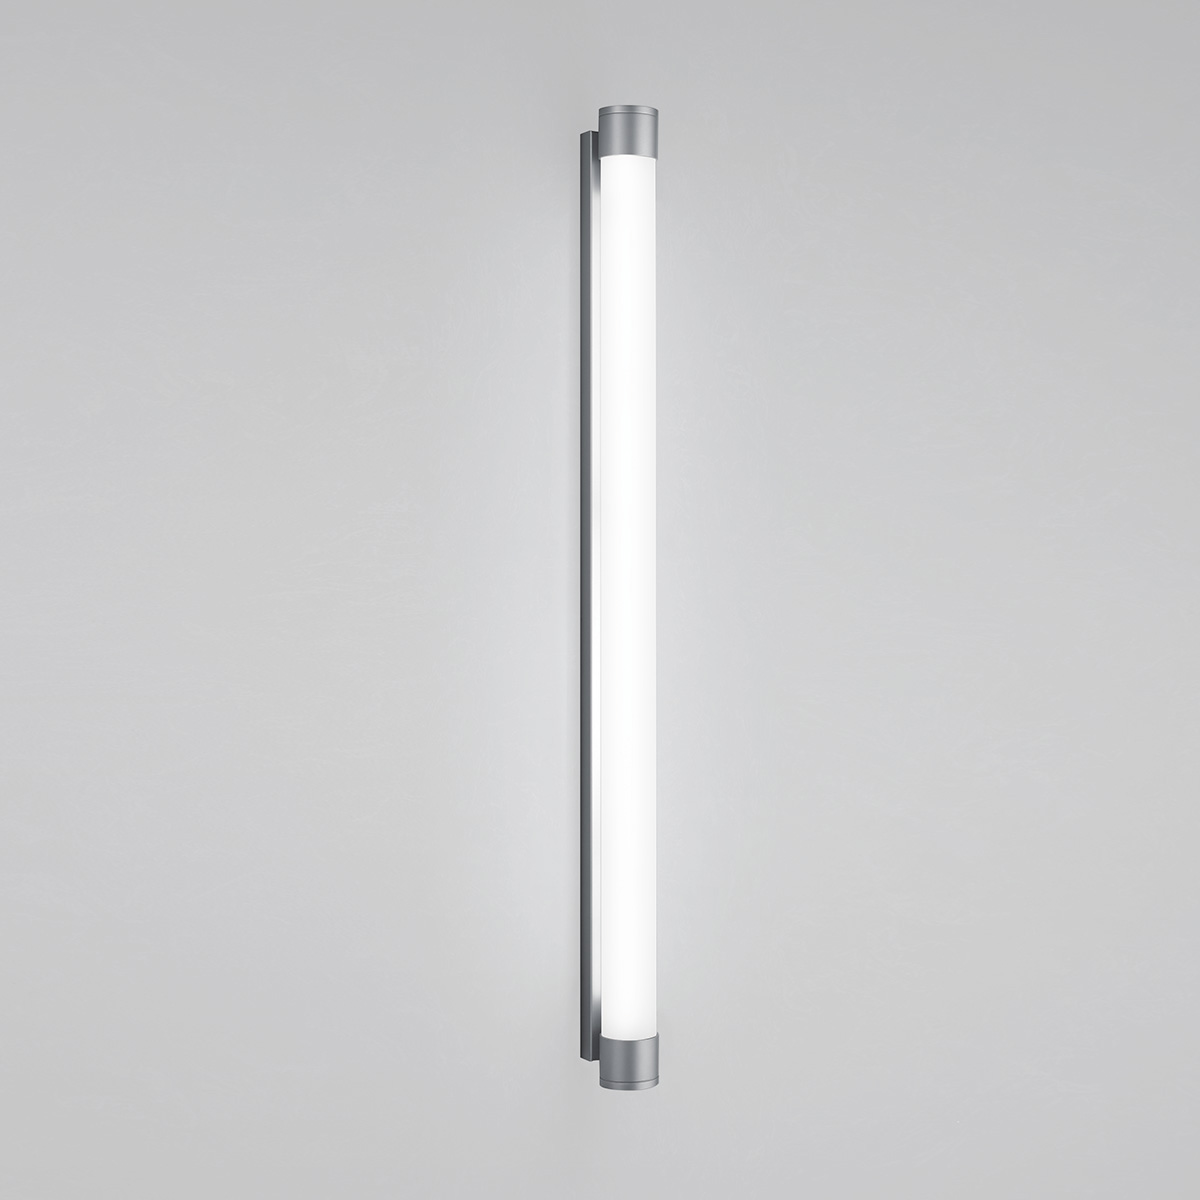 A luminous wall sconce in a thin tube shape with metal caps on each end